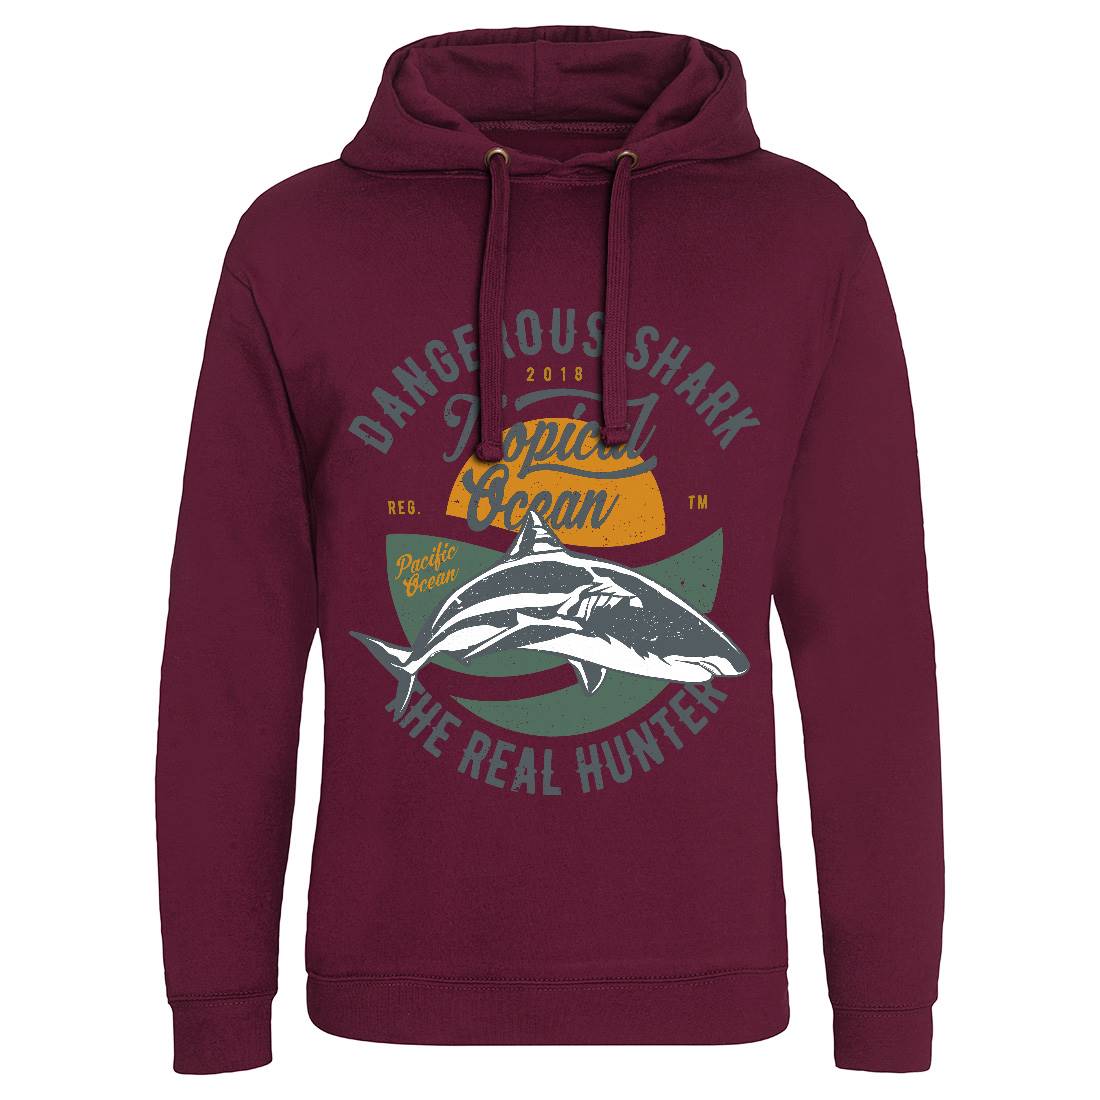 Dangerous Shark Mens Hoodie Without Pocket Navy A643